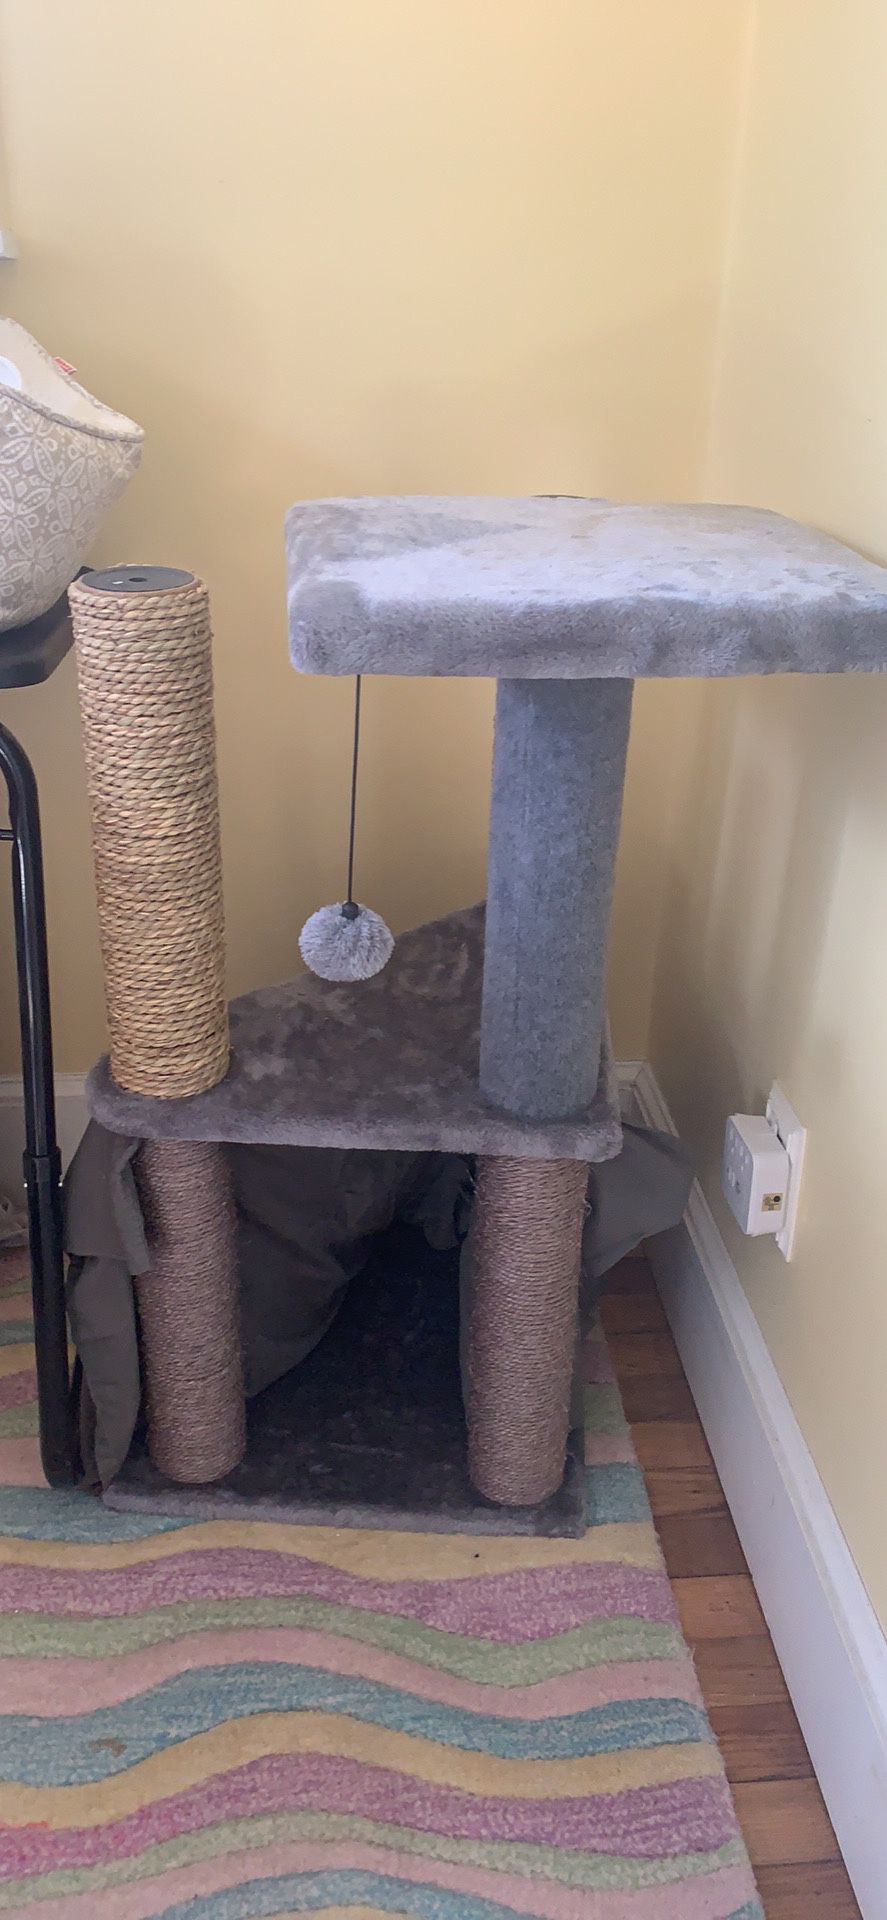 Cat play area brand new cat never touched it